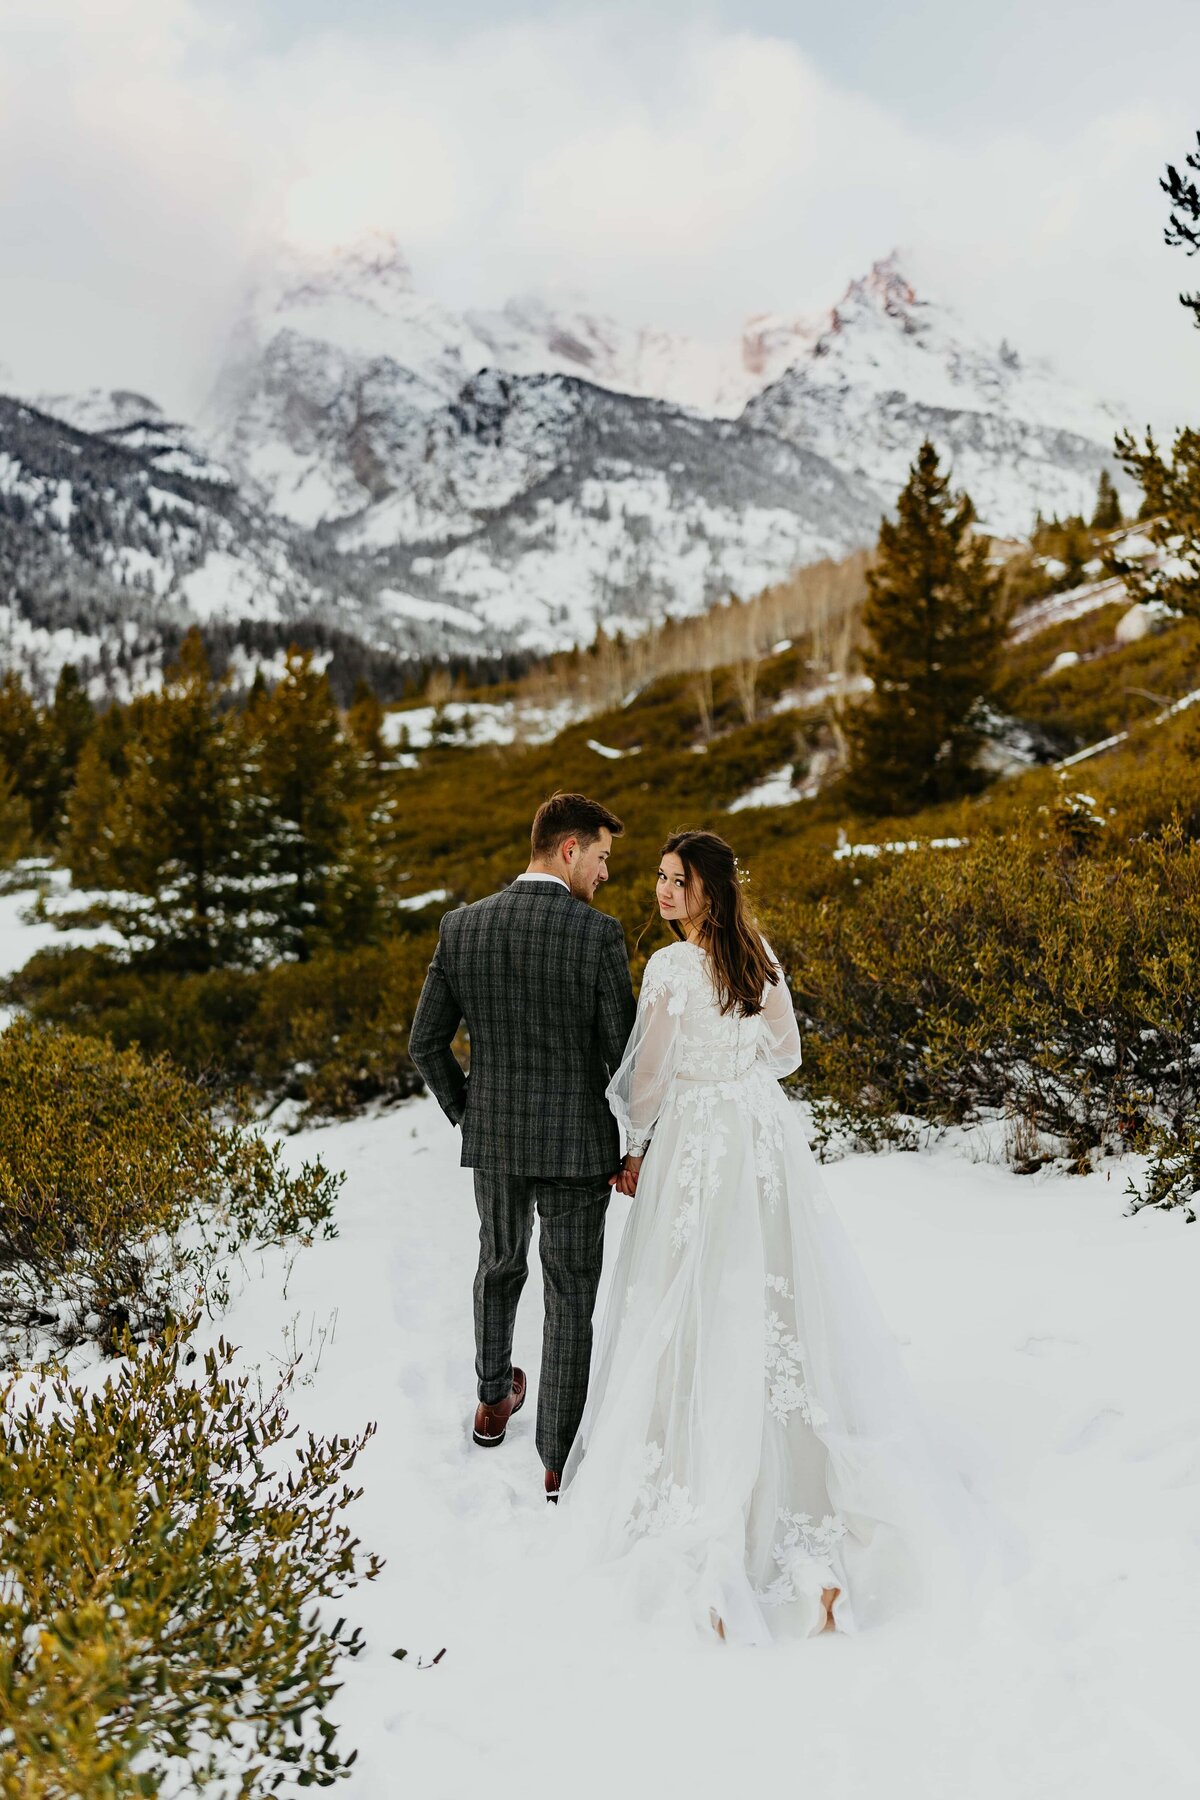 A couple doing their bridal photos on Taggart Lake Trail in Grand Teton National Park